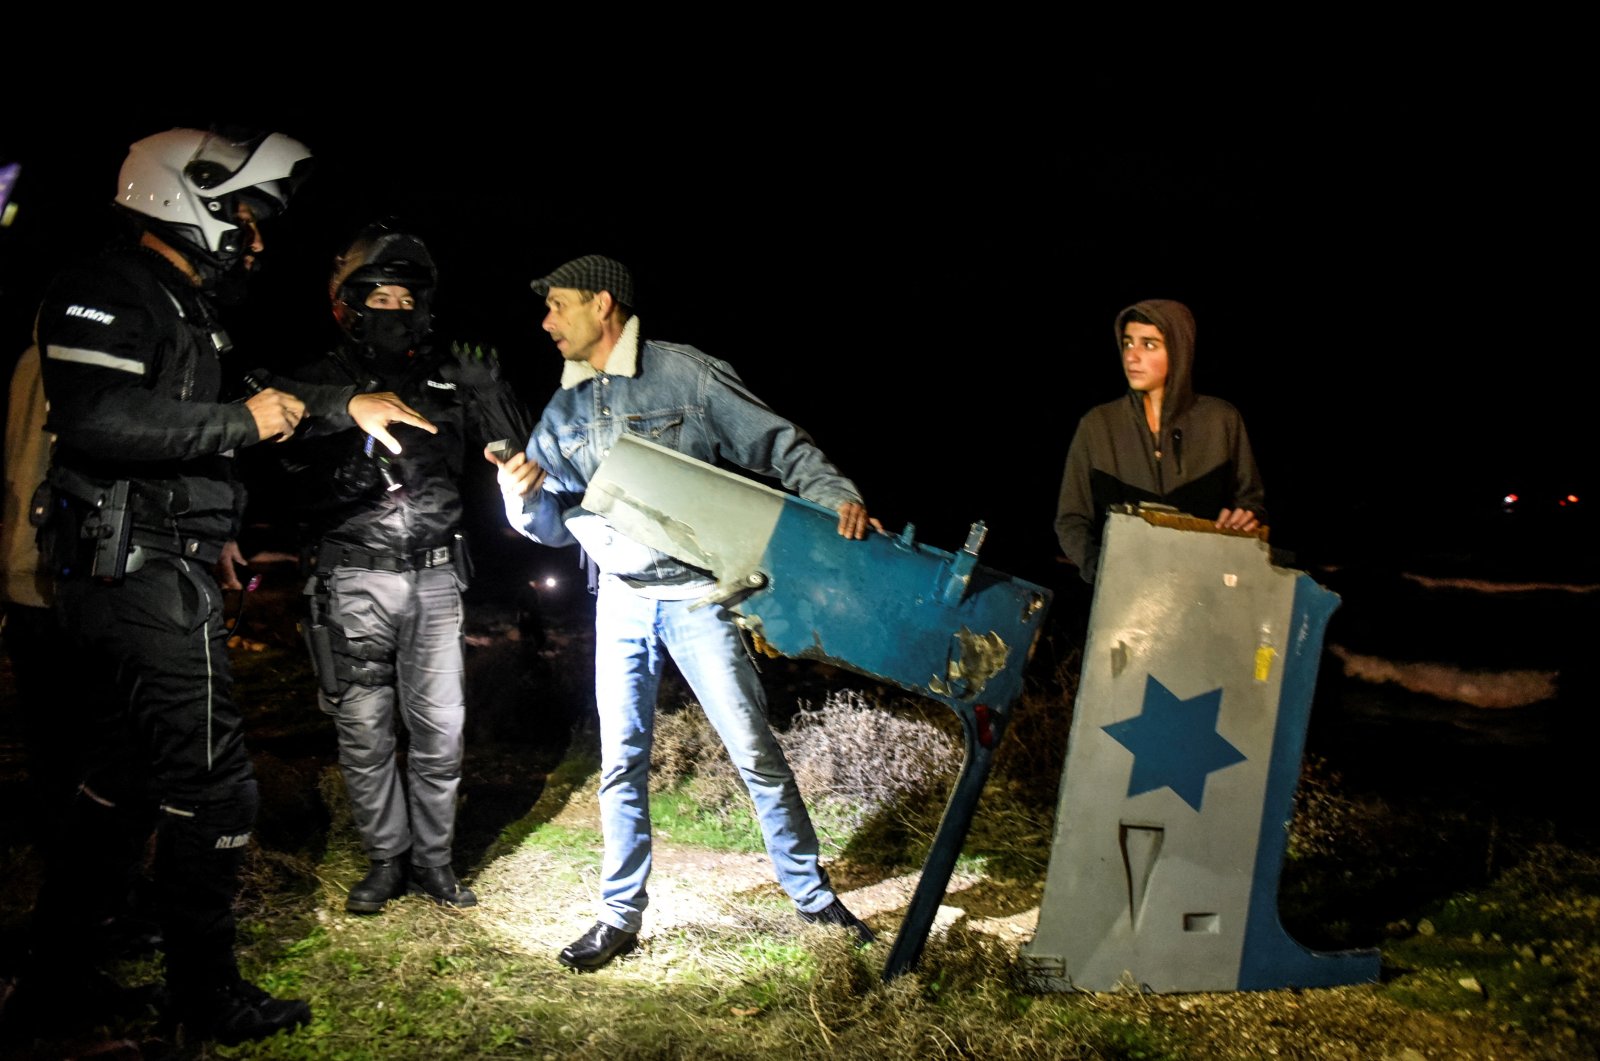 Police speak with Israelis as they hold parts of a military helicopter at the shore after it crashed off the coast of the Mediterranean near Haifa, Israel, Jan. 3, 2022. (Reuters Photo)